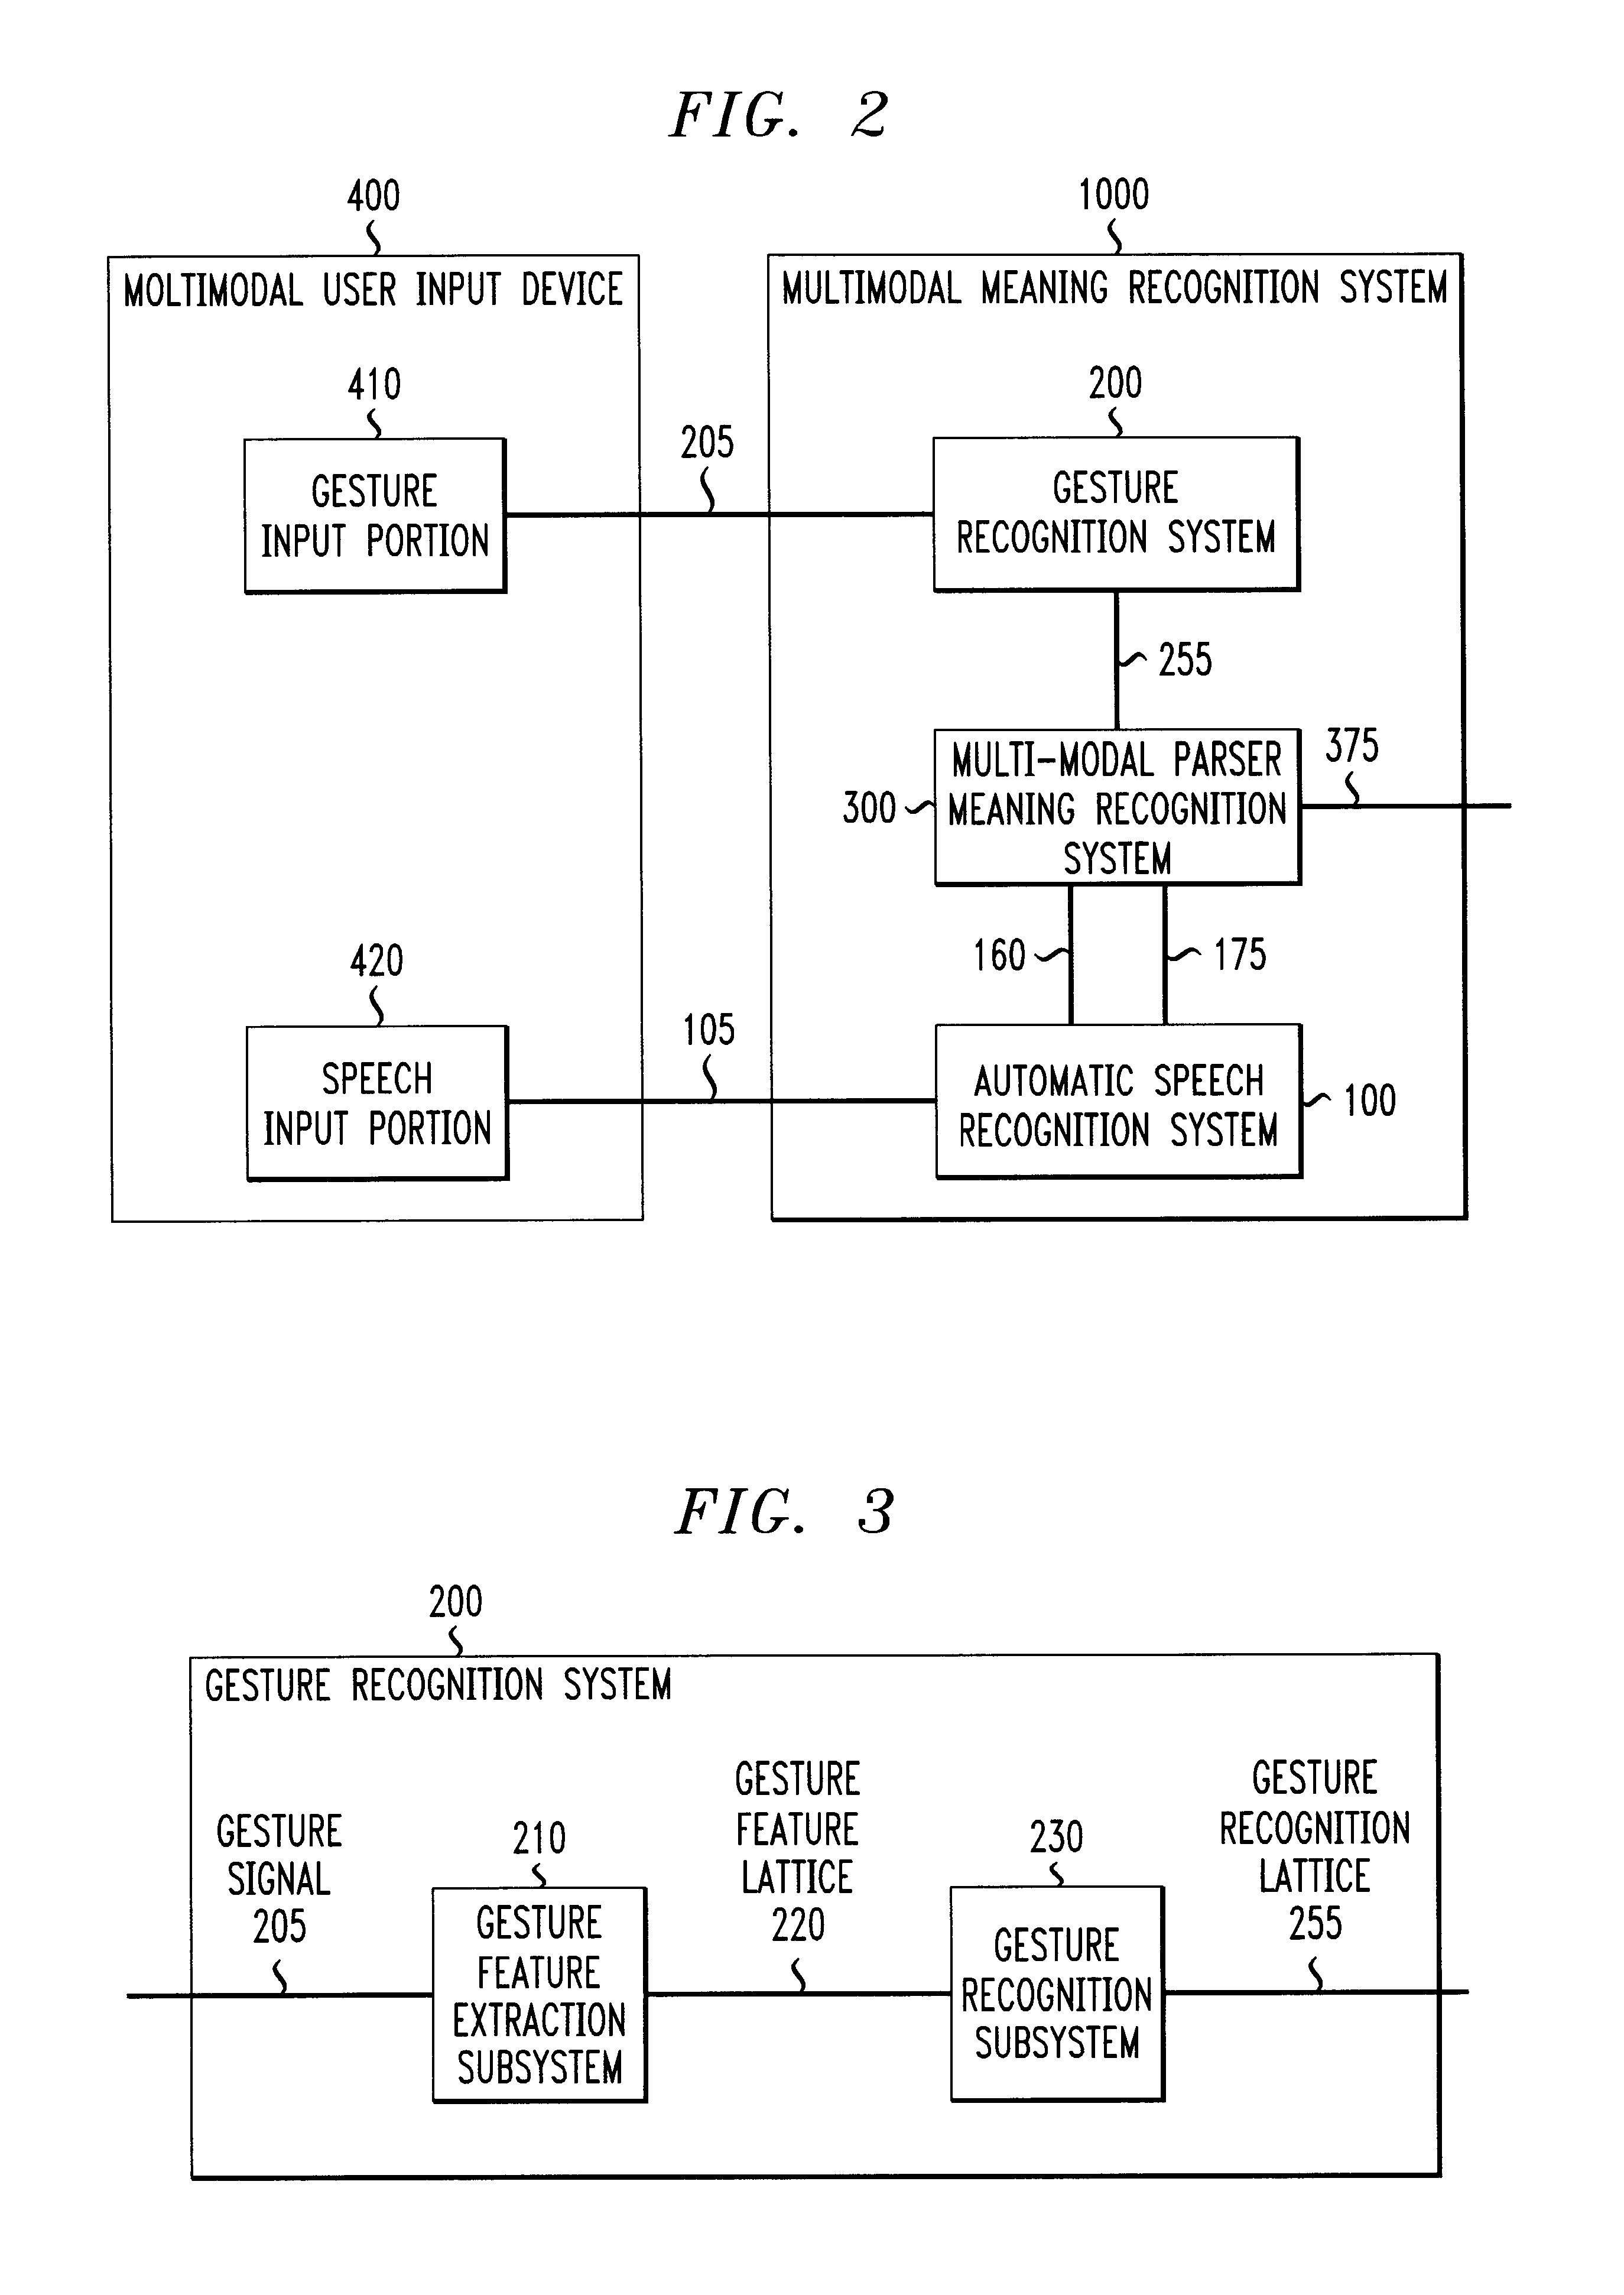 Systems and methods for extracting meaning from multimodal inputs using finite-state devices